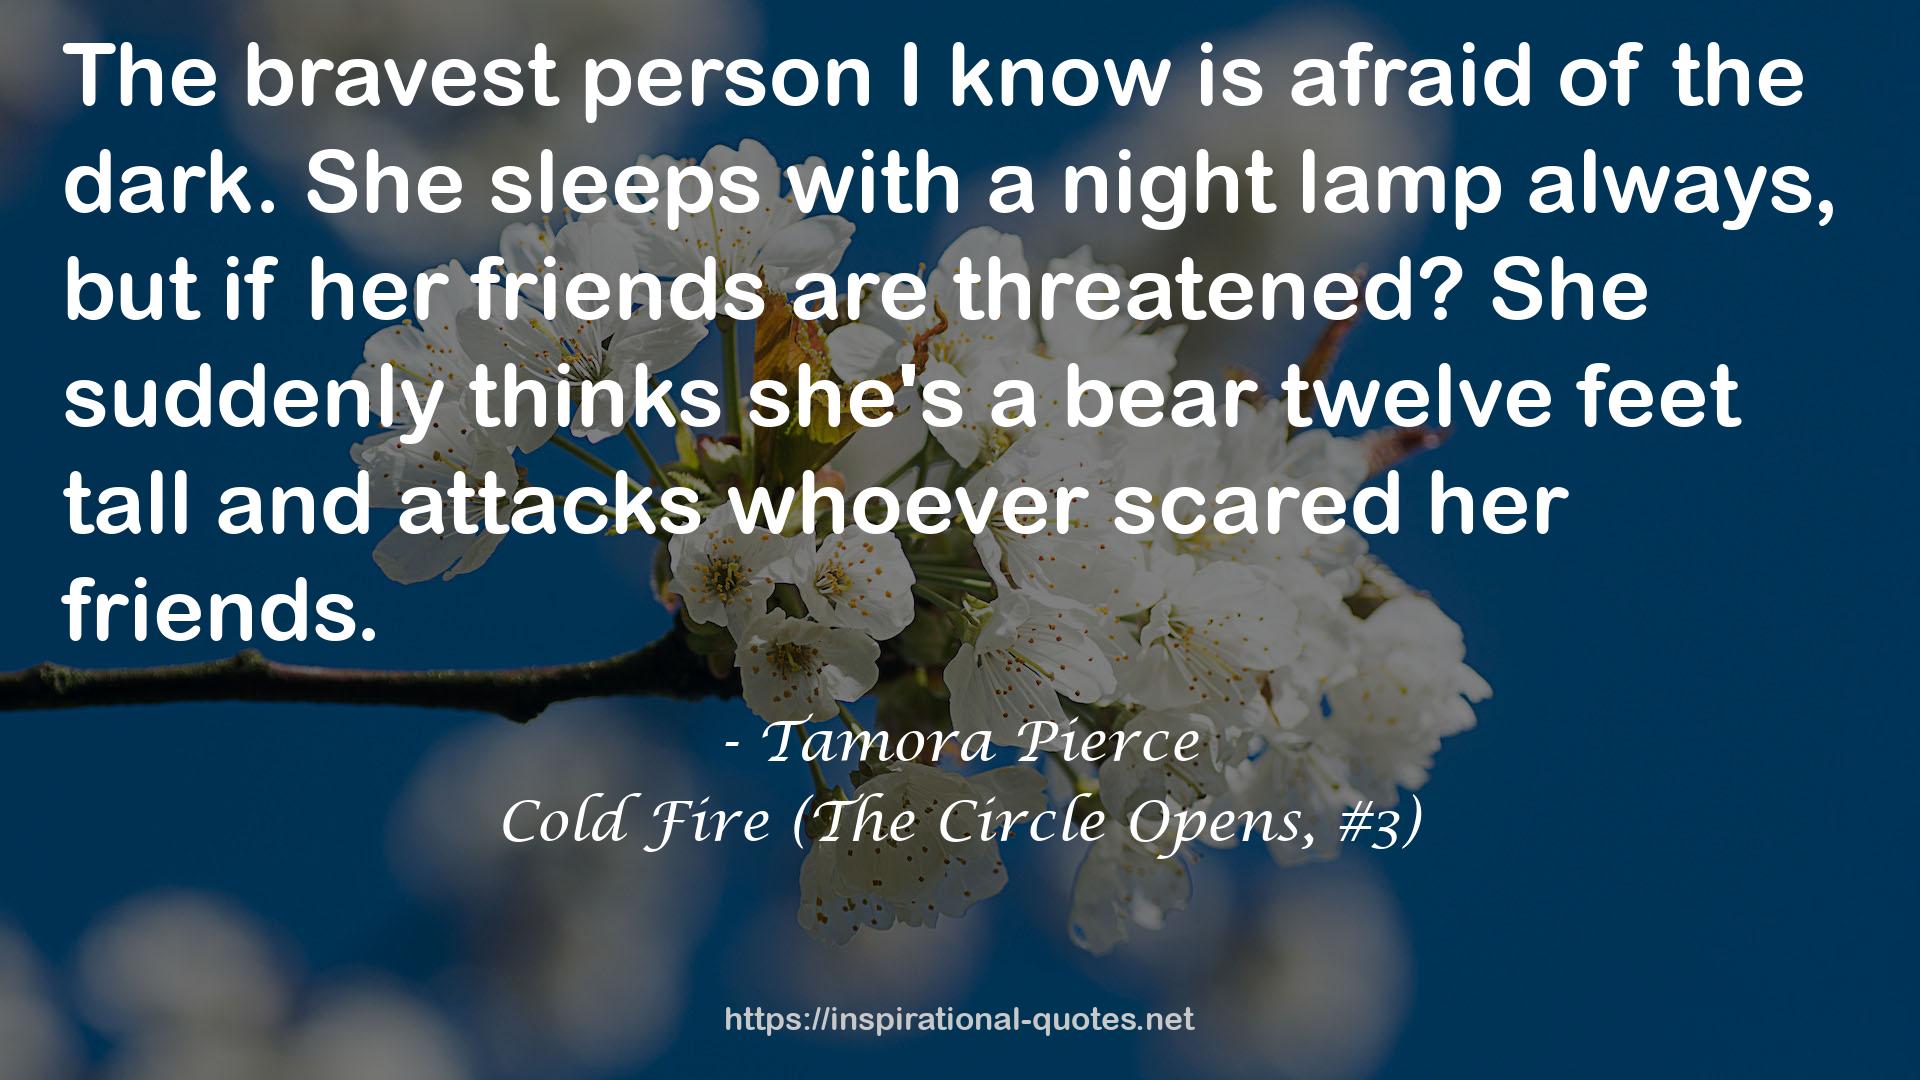 Cold Fire (The Circle Opens, #3) QUOTES